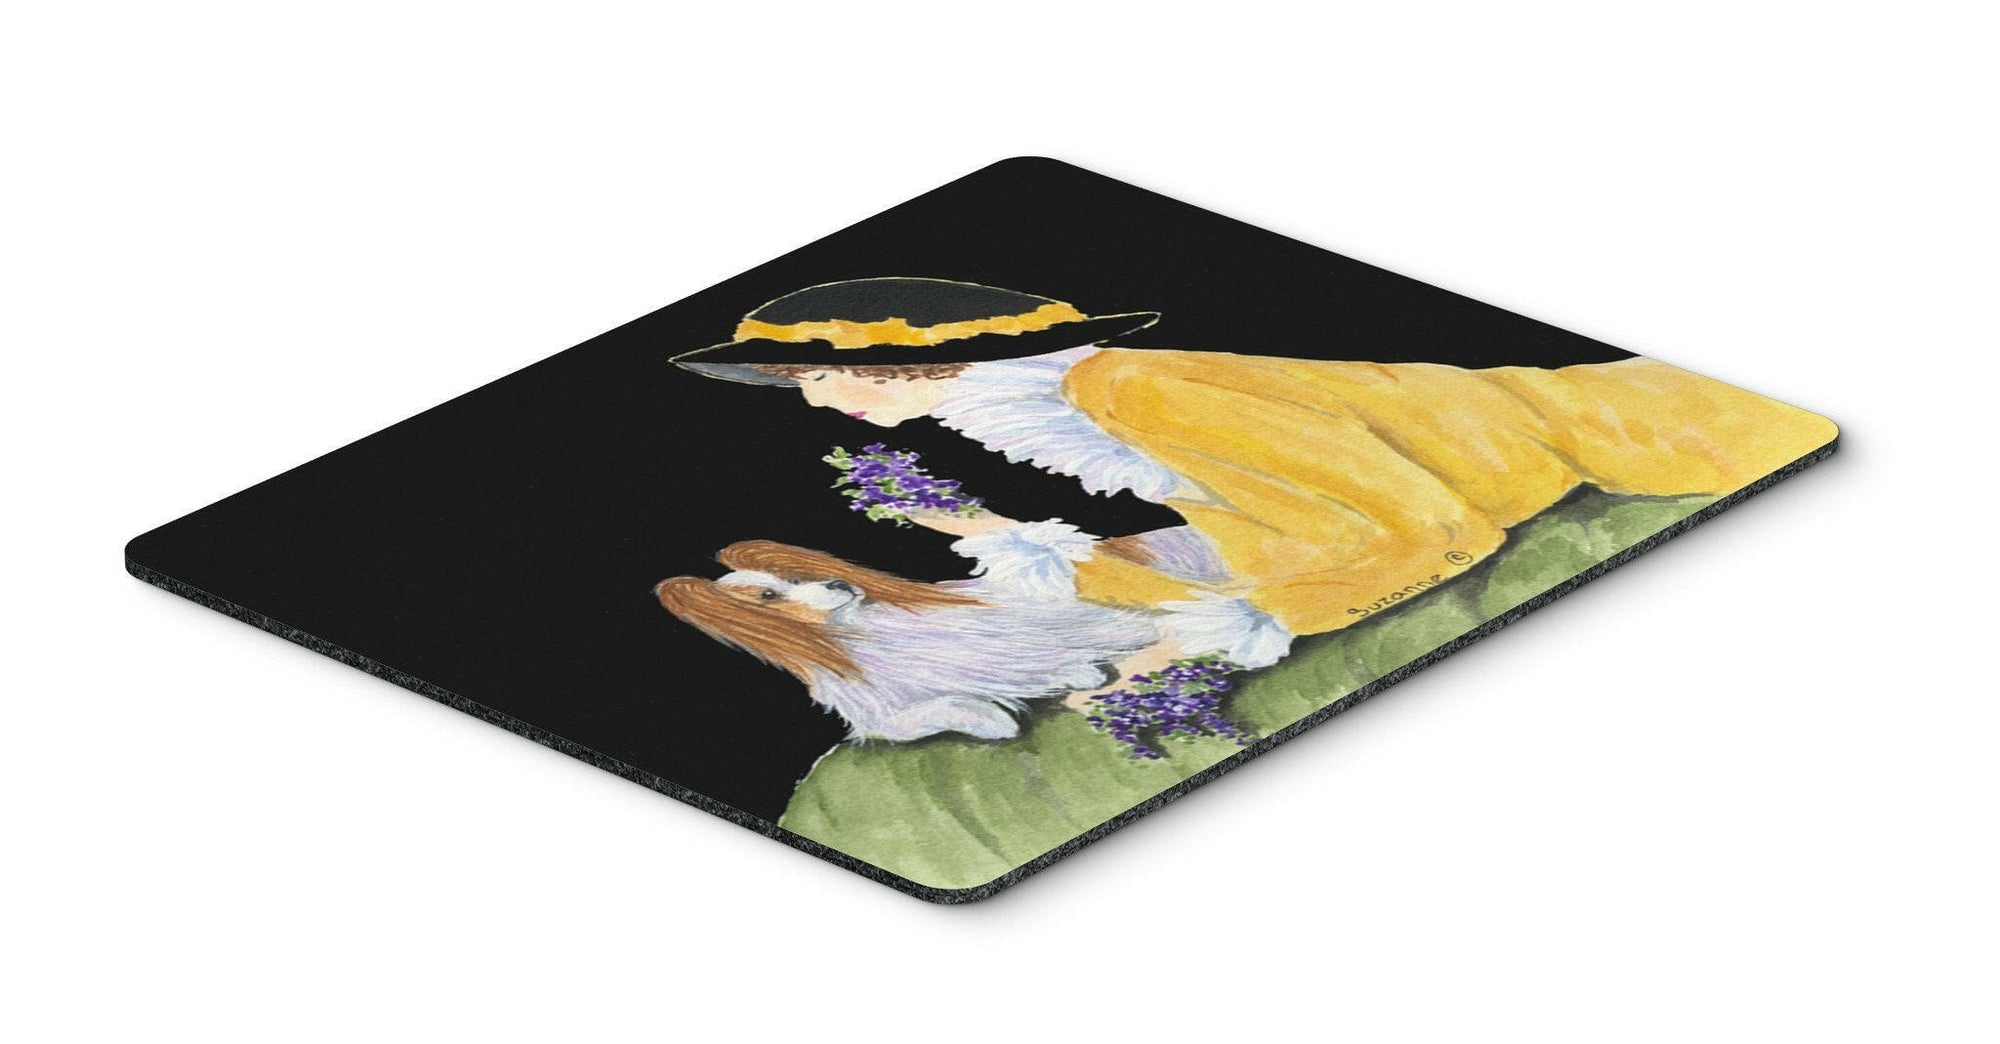 Papillon Mouse pad, hot pad, or trivet by Caroline's Treasures